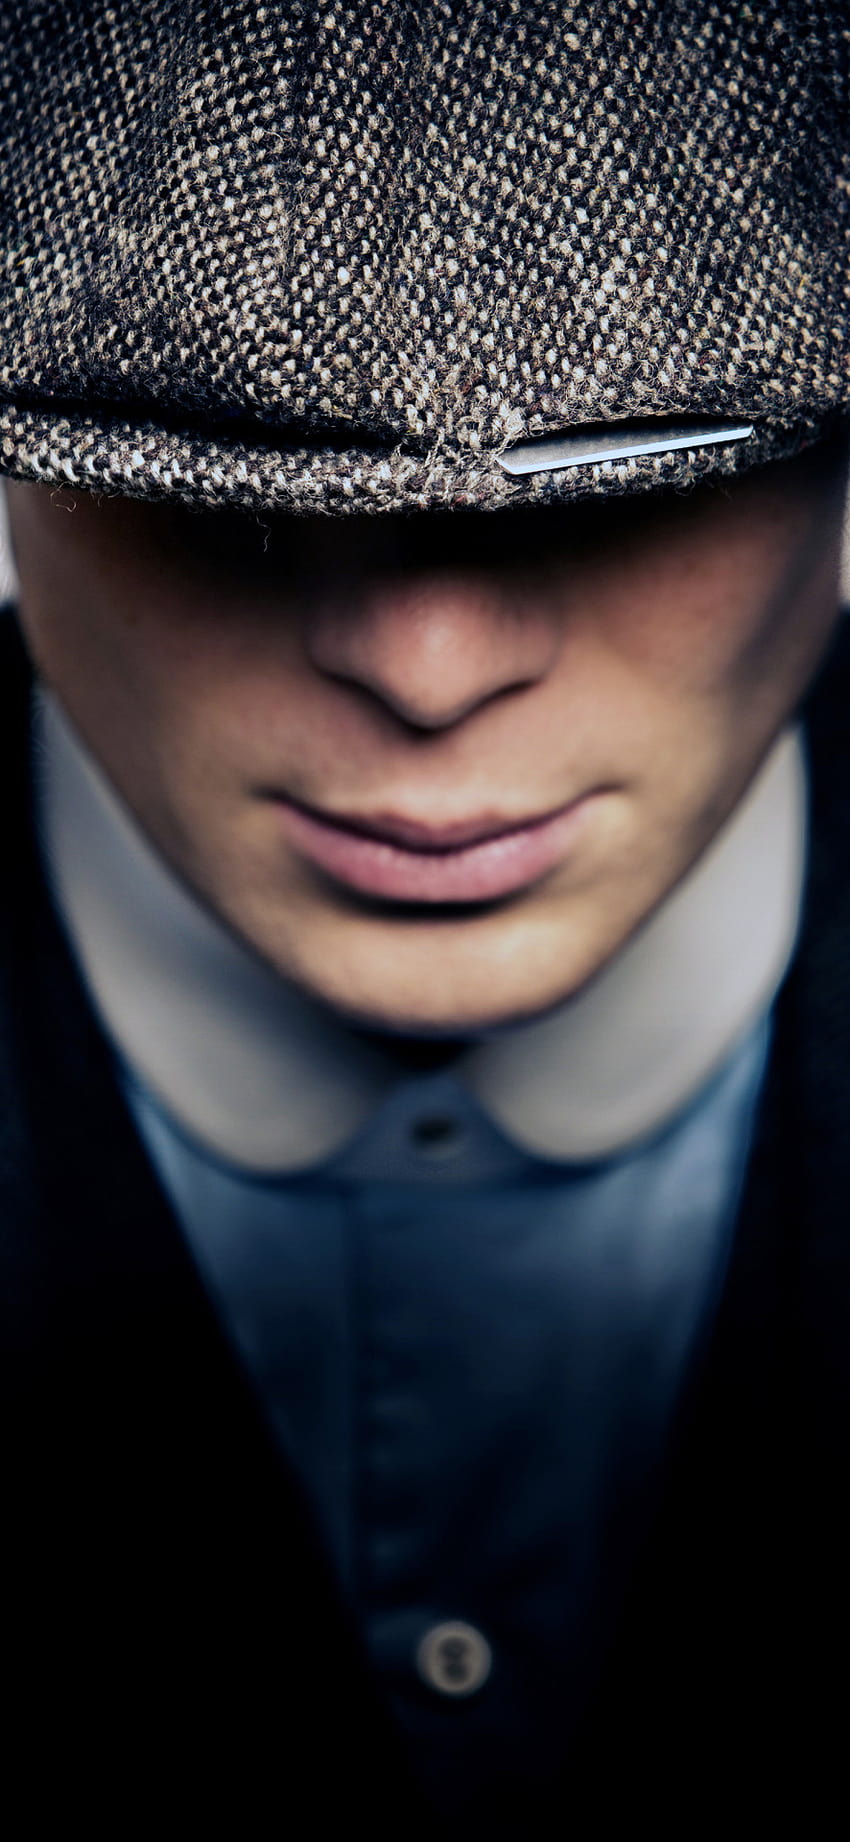 Peaky Blinders nel 2020 Con Peaky blinders [886x1920] per il tuo cellulare e tablet, peaky blinders thomas shelby Sfondo del telefono HD